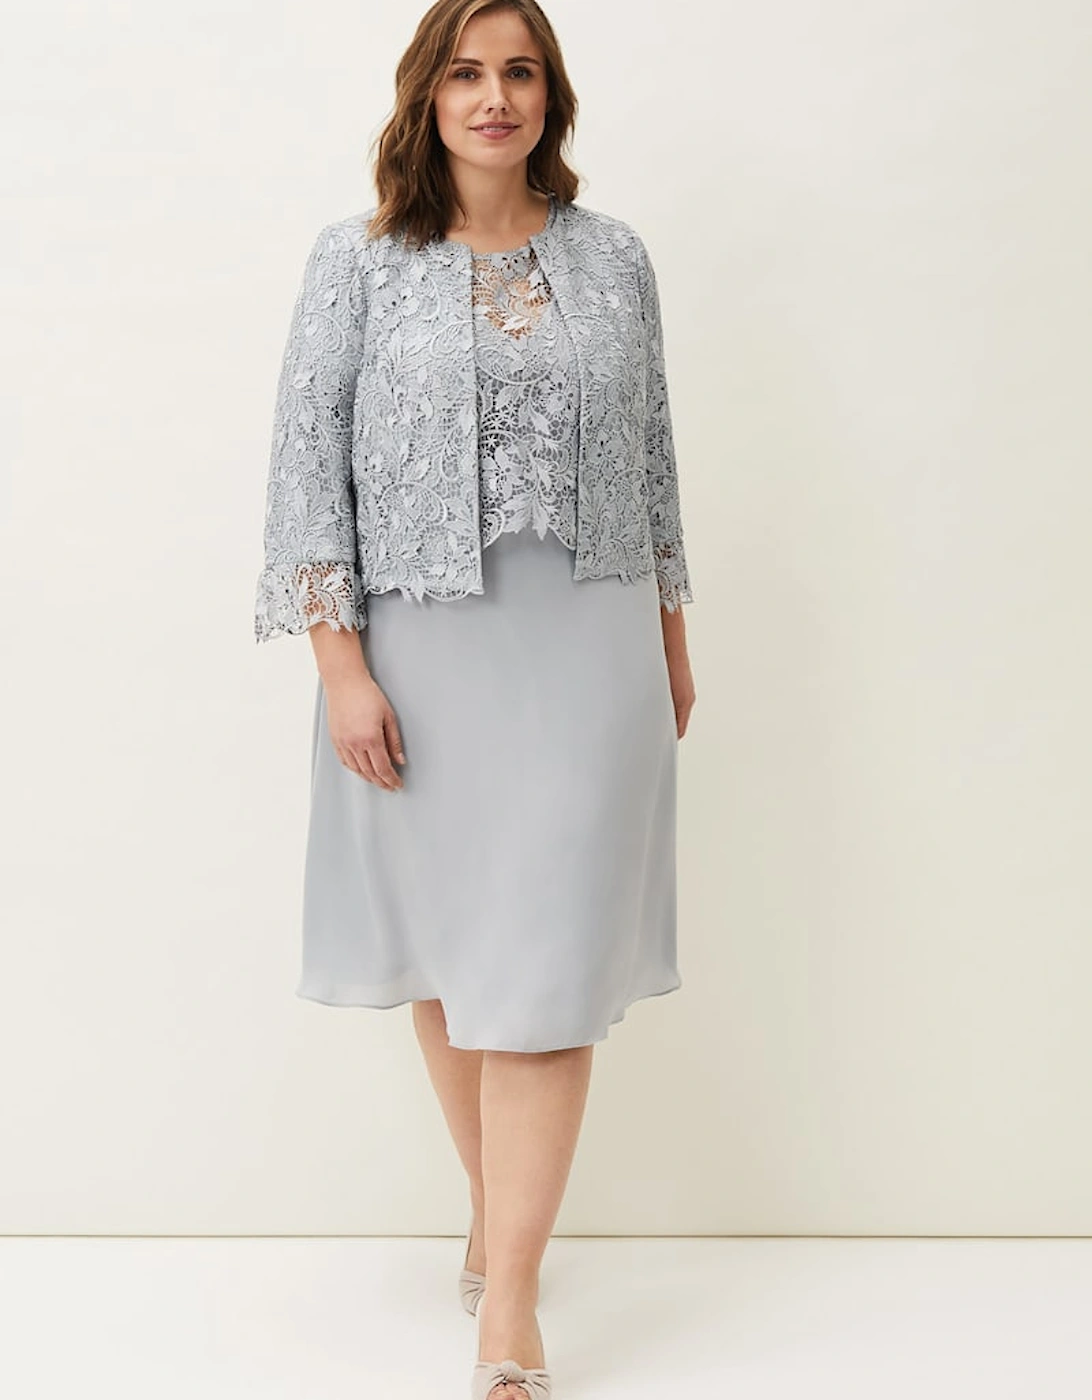 Luisa Lace Occasion Jacket